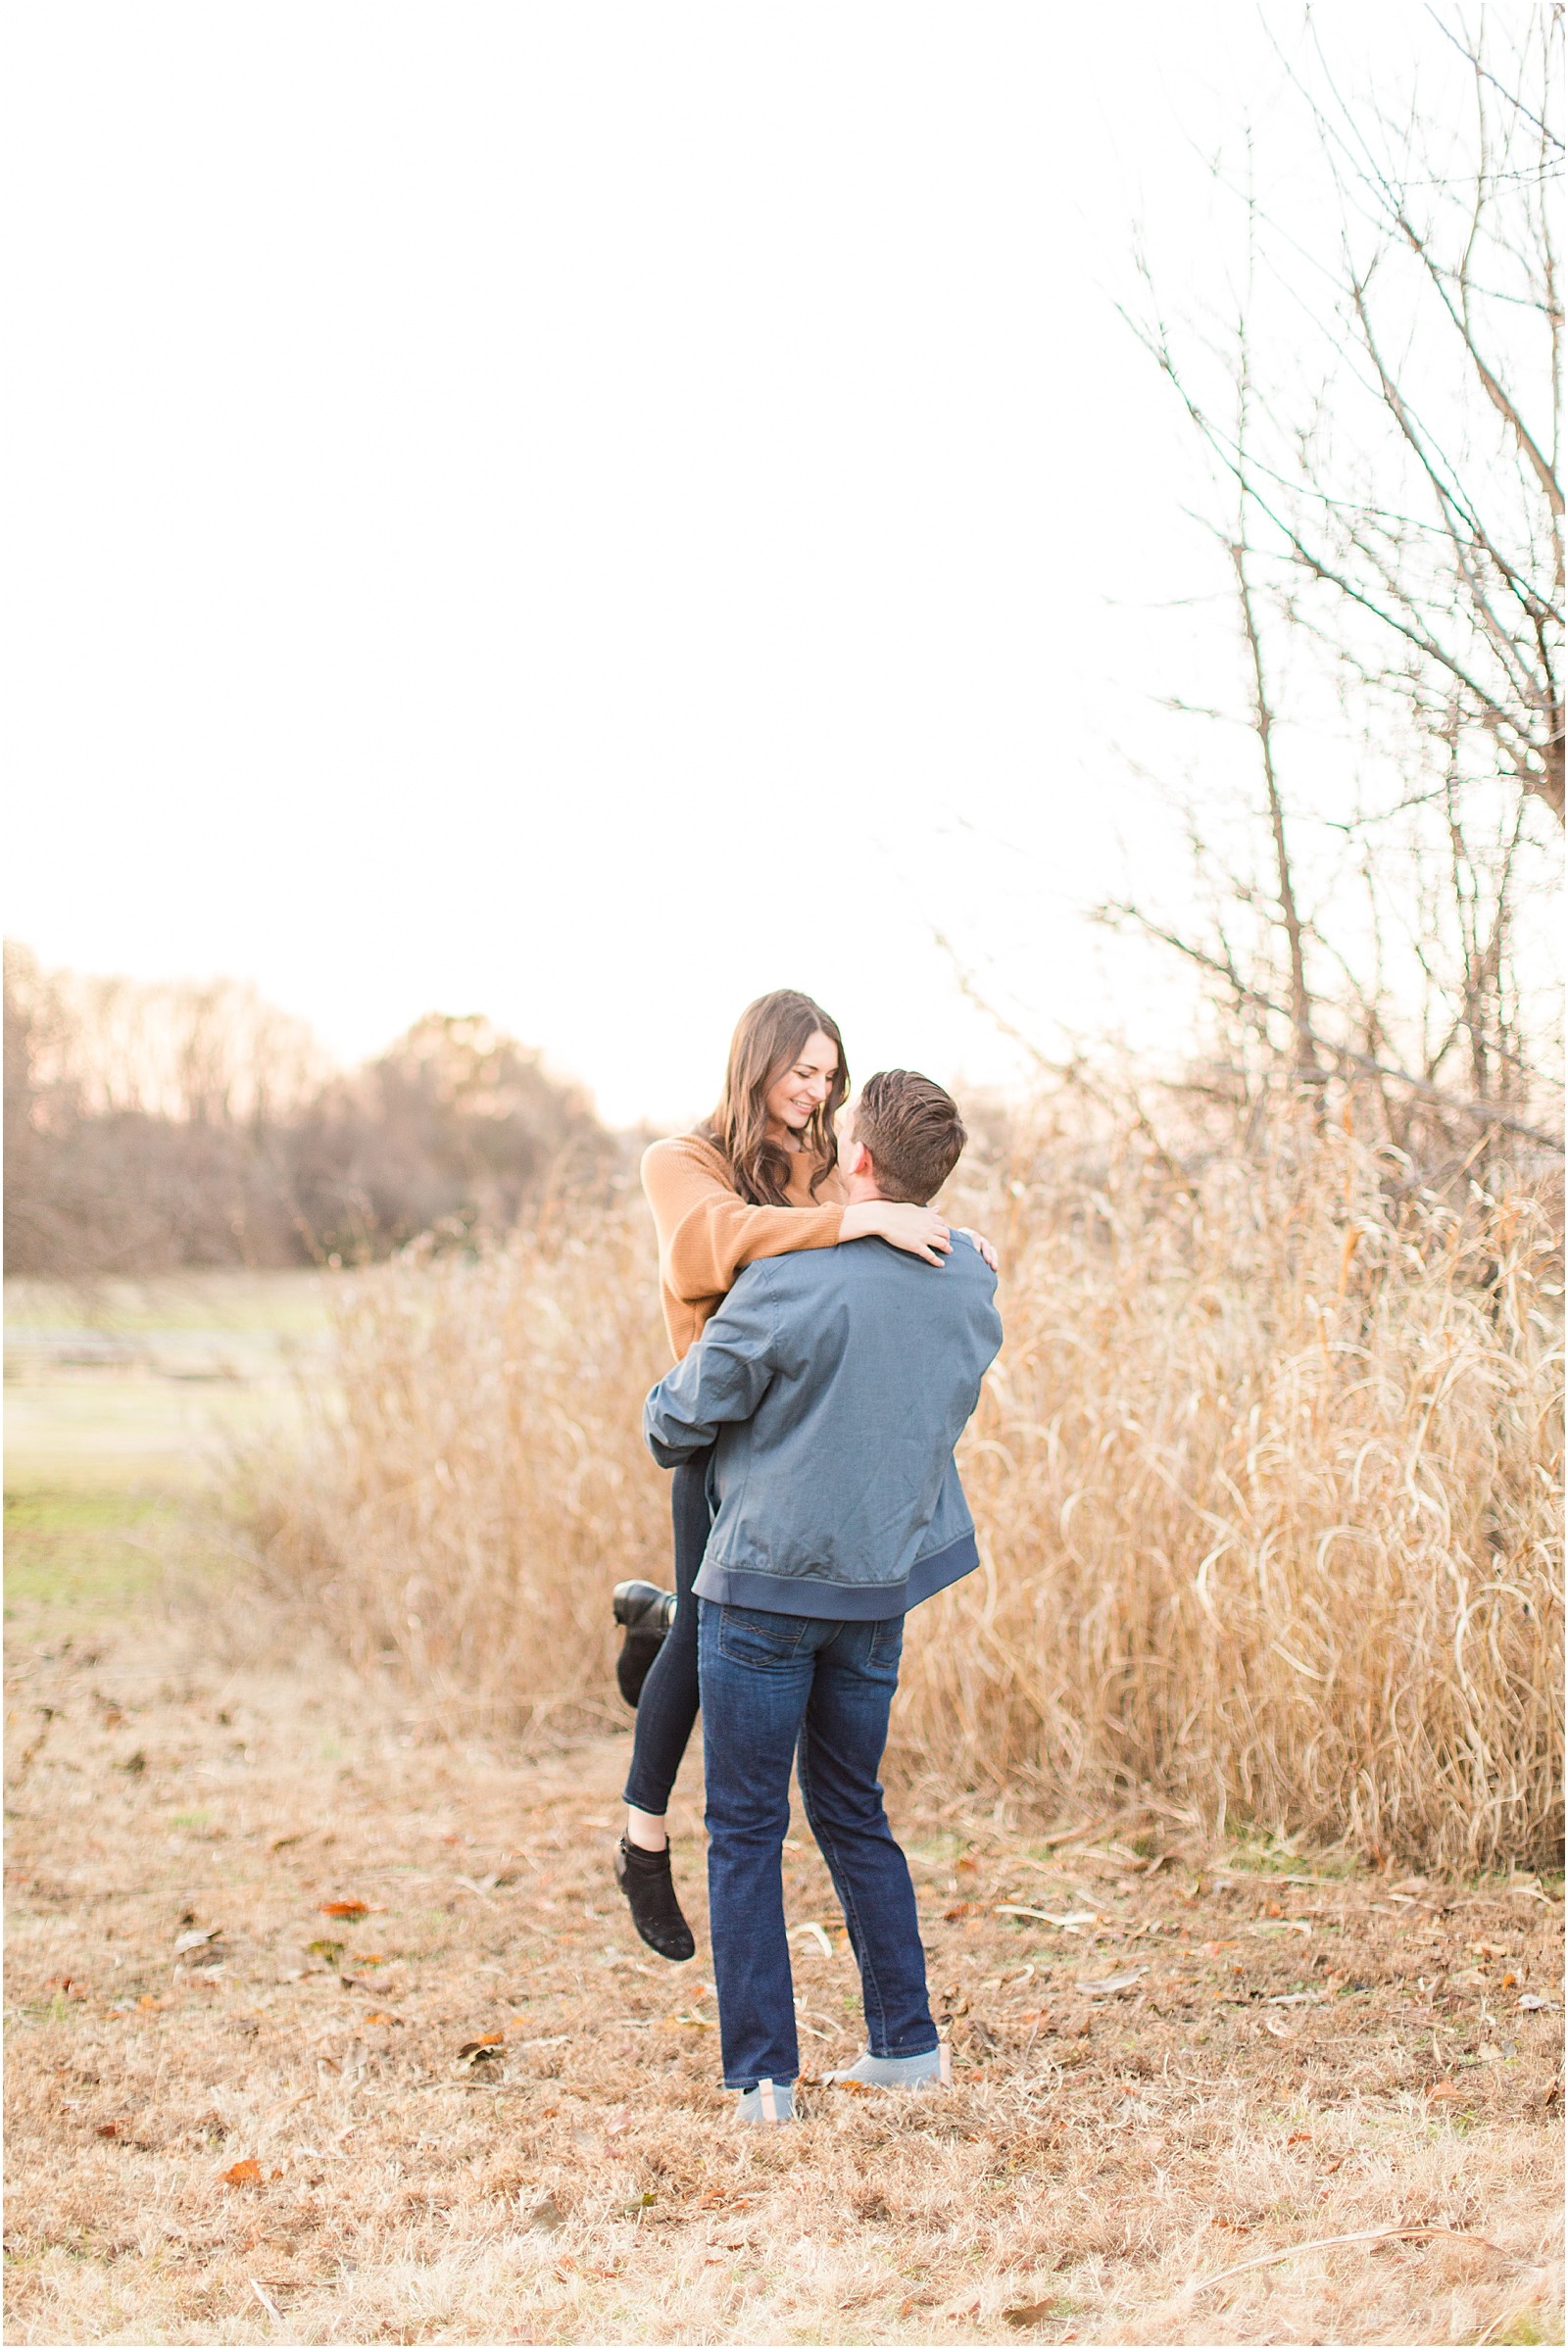 Kaley and Devon's fall Evansville Indiana engagement session. | #fallengagementsession #evansvilleindiana #evansvilleindianawedding | 0048.jpg